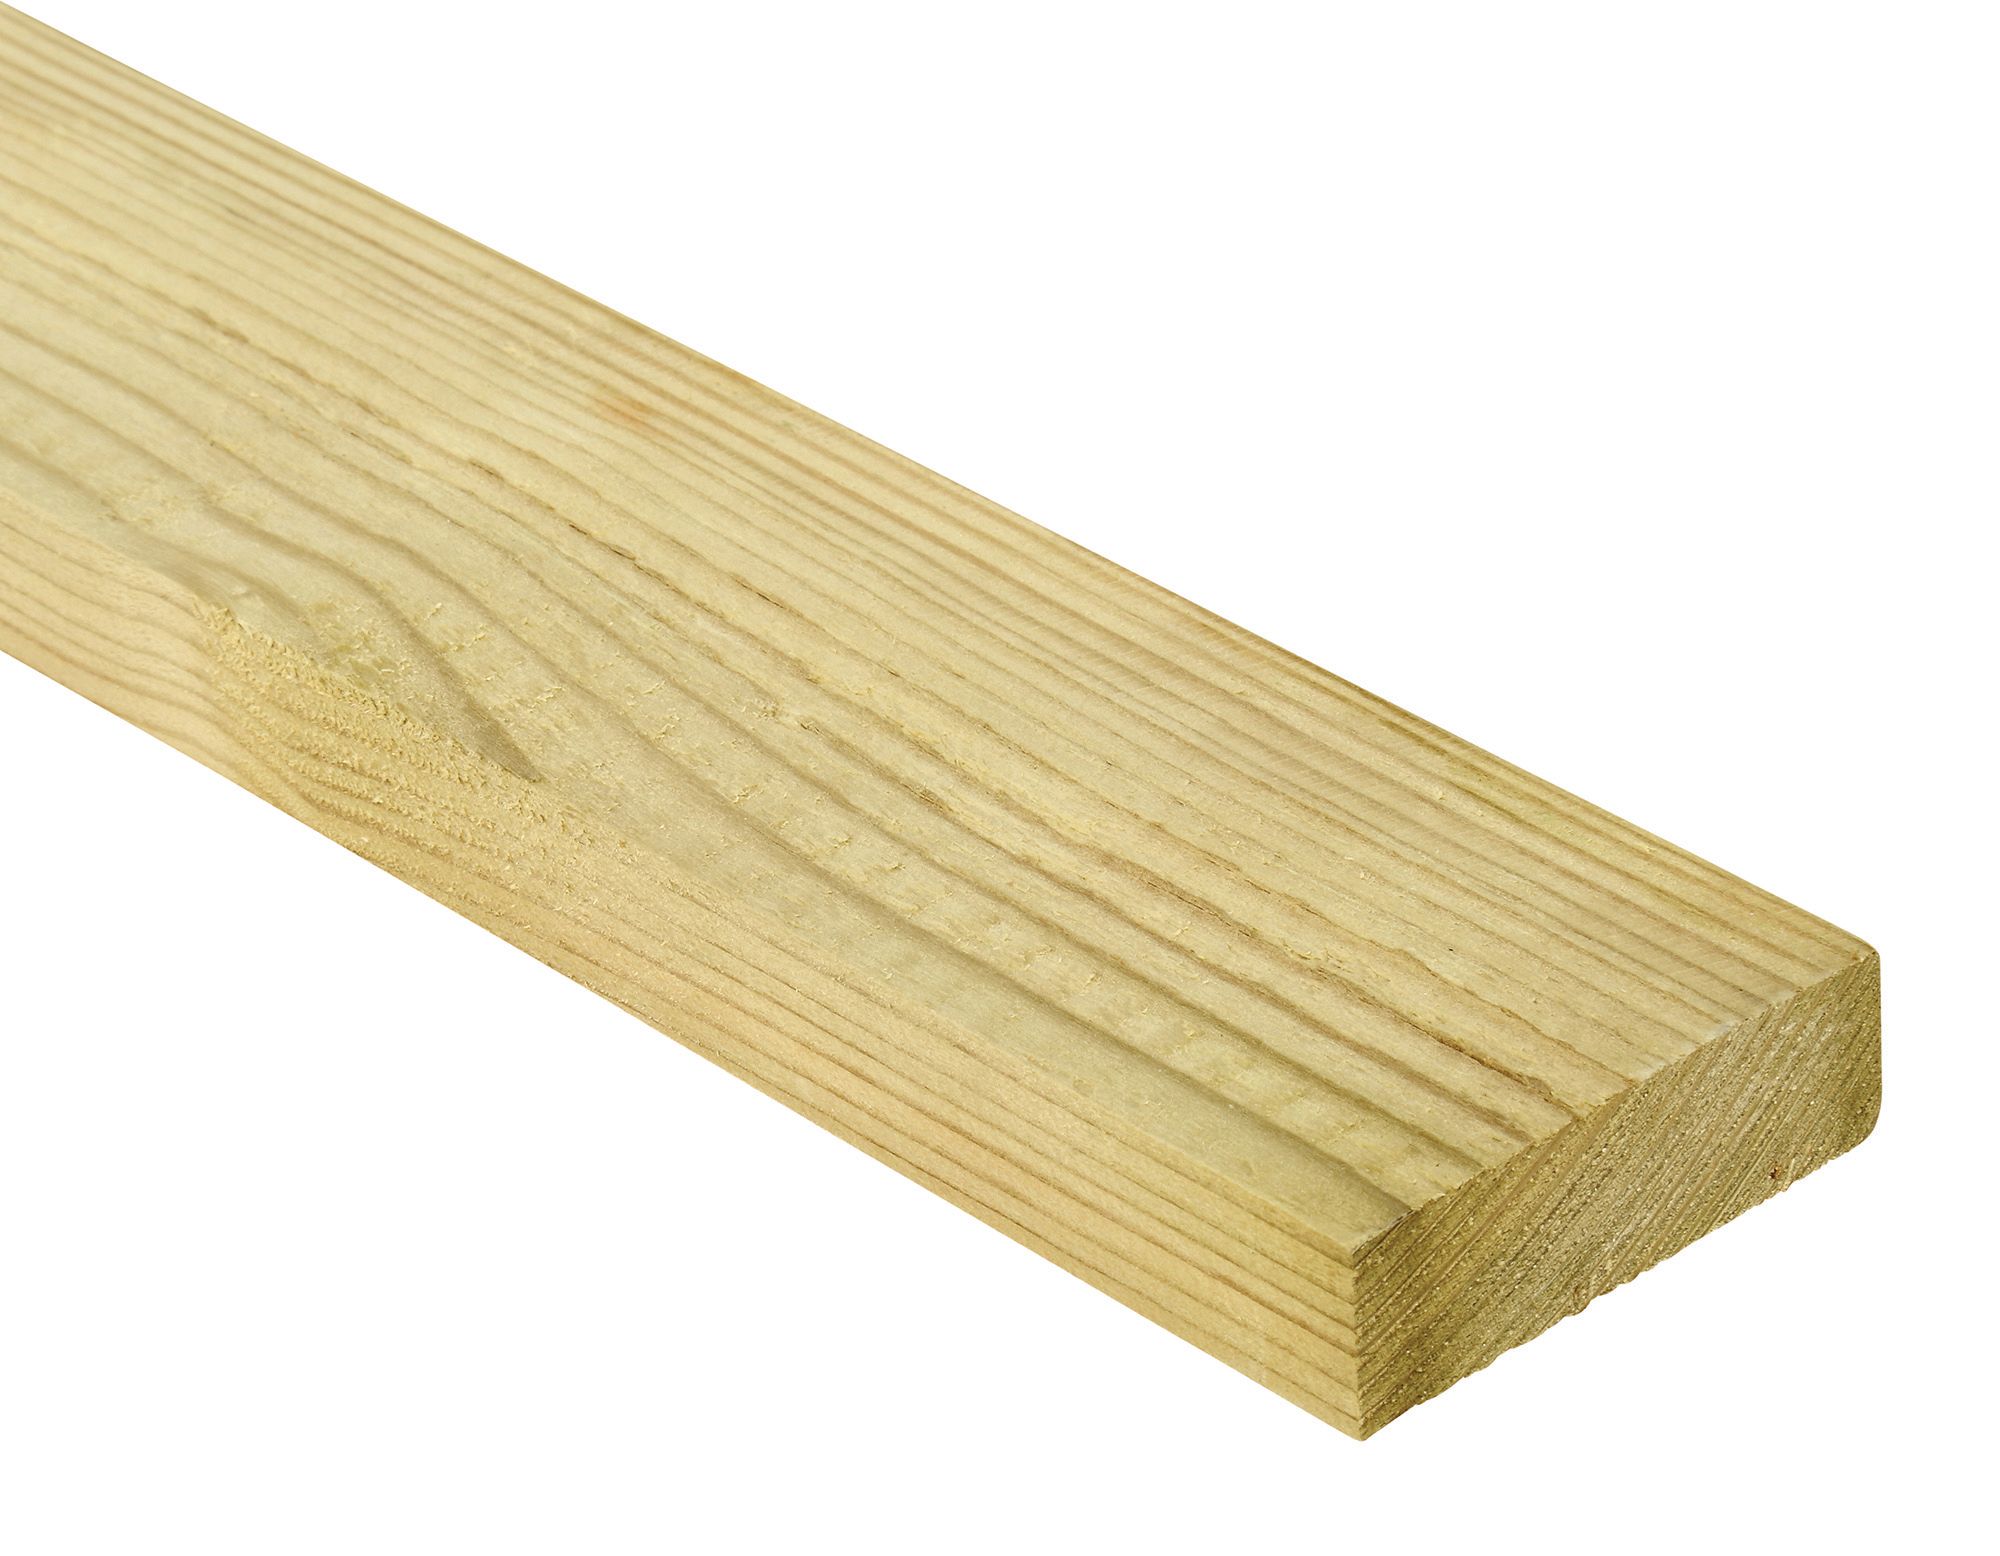 Image of Wickes Treated Sawn Timber - 22mm x 75mm x 2400mm